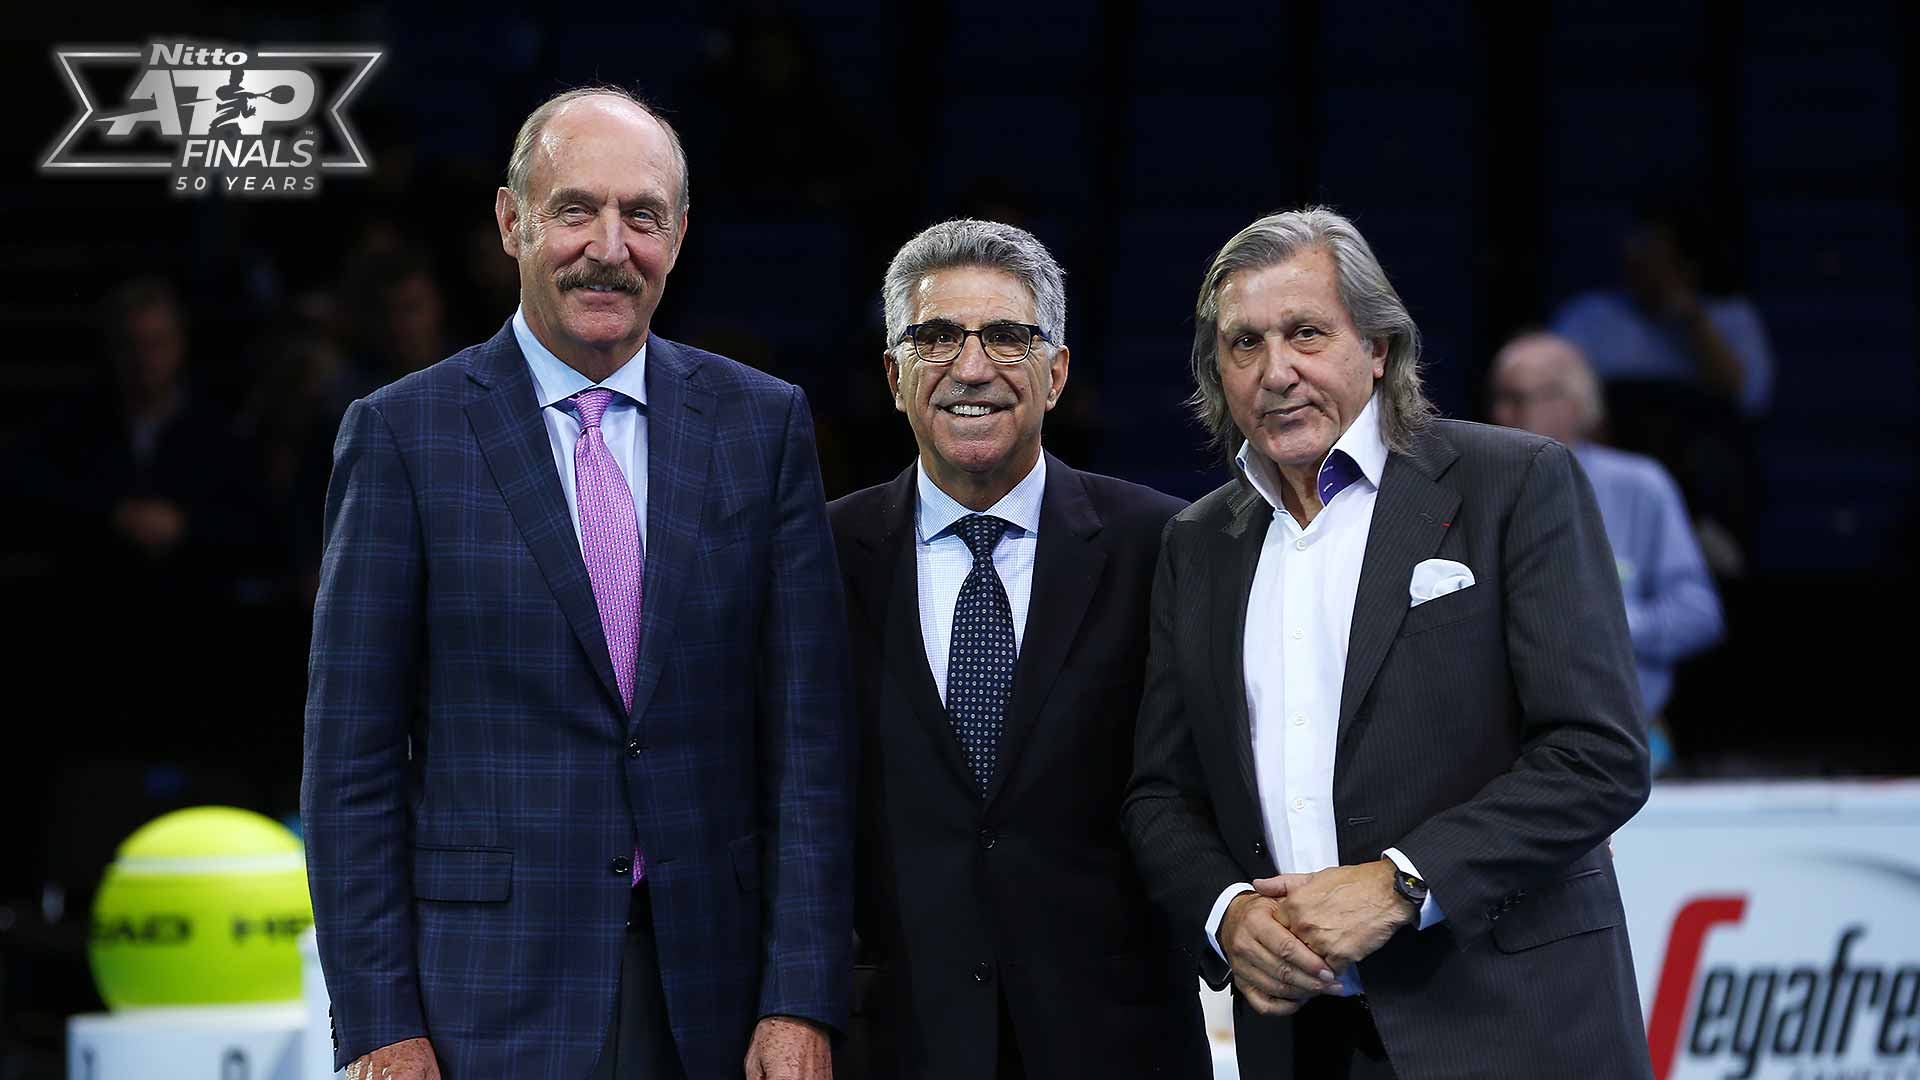 Orantes (center) became the first Spaniard to win the Masters in 1976.